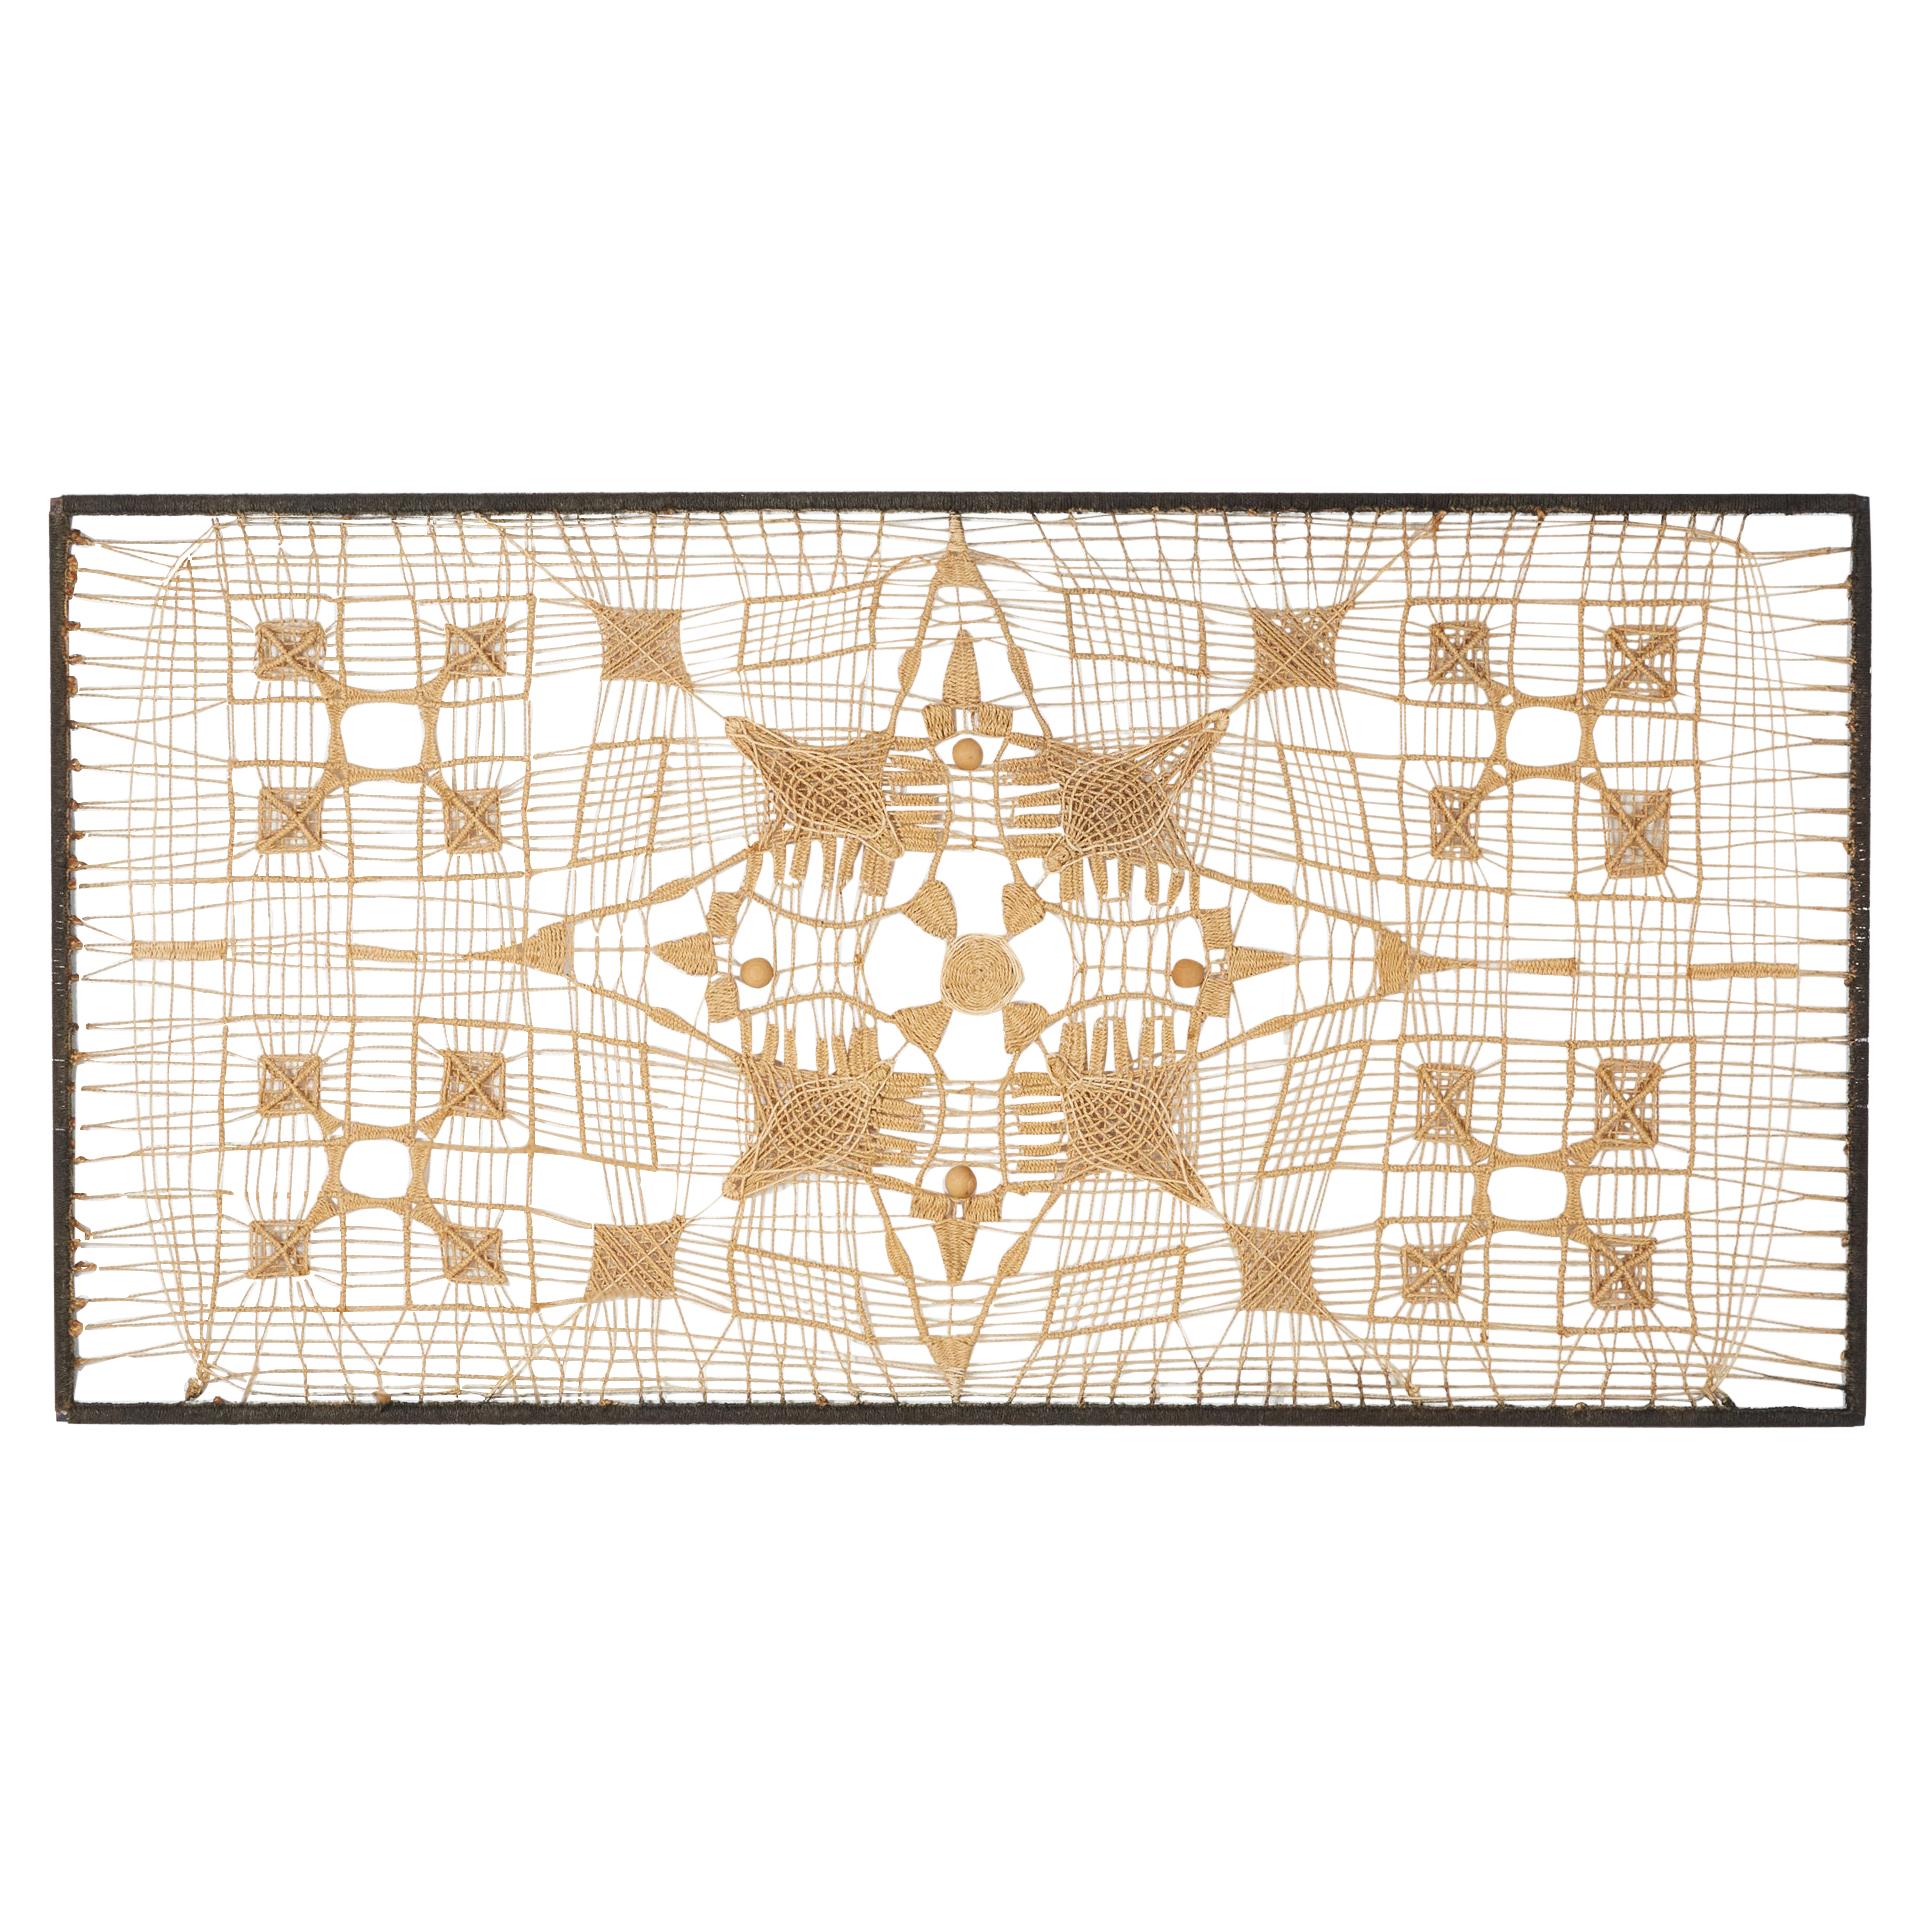 Hand-Woven Craftsman Wall Artwork For Sale